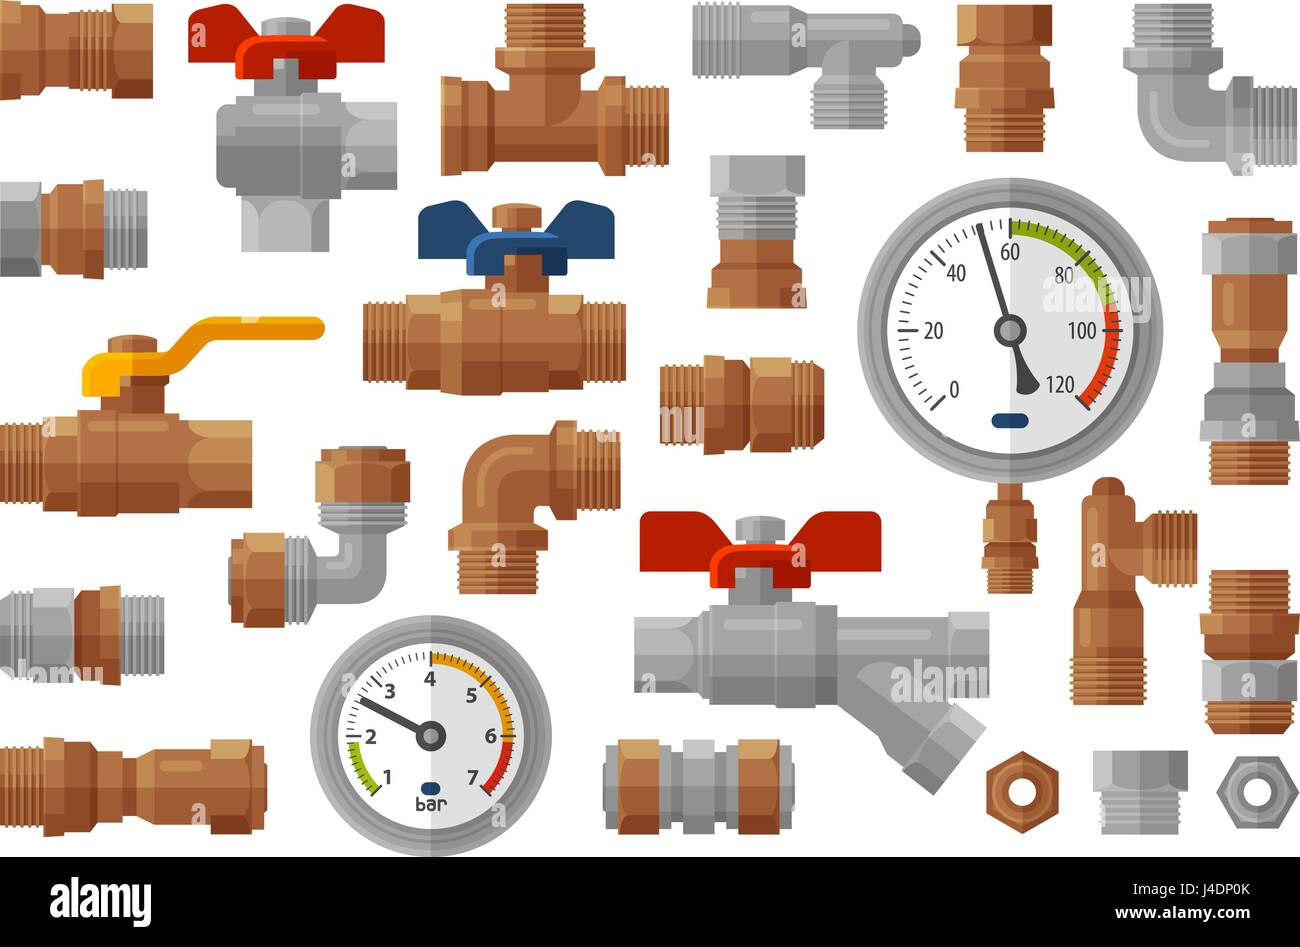 Sanitary engineering, plumbing equipment set icons. Manometer pressure, industry, fittings, water supply concept Stock Vector